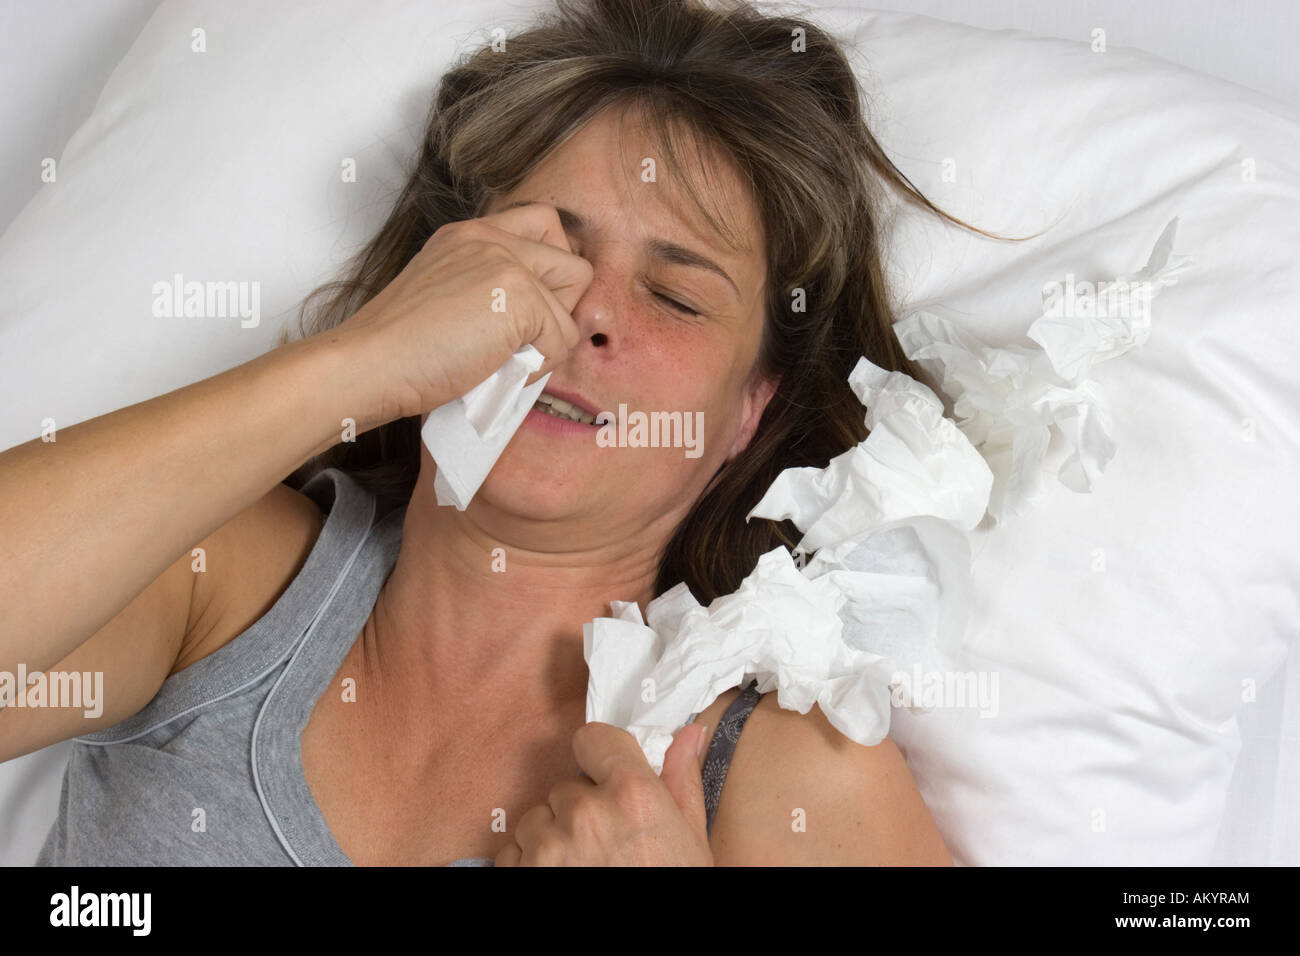 Crying woman in bed Stock Photo